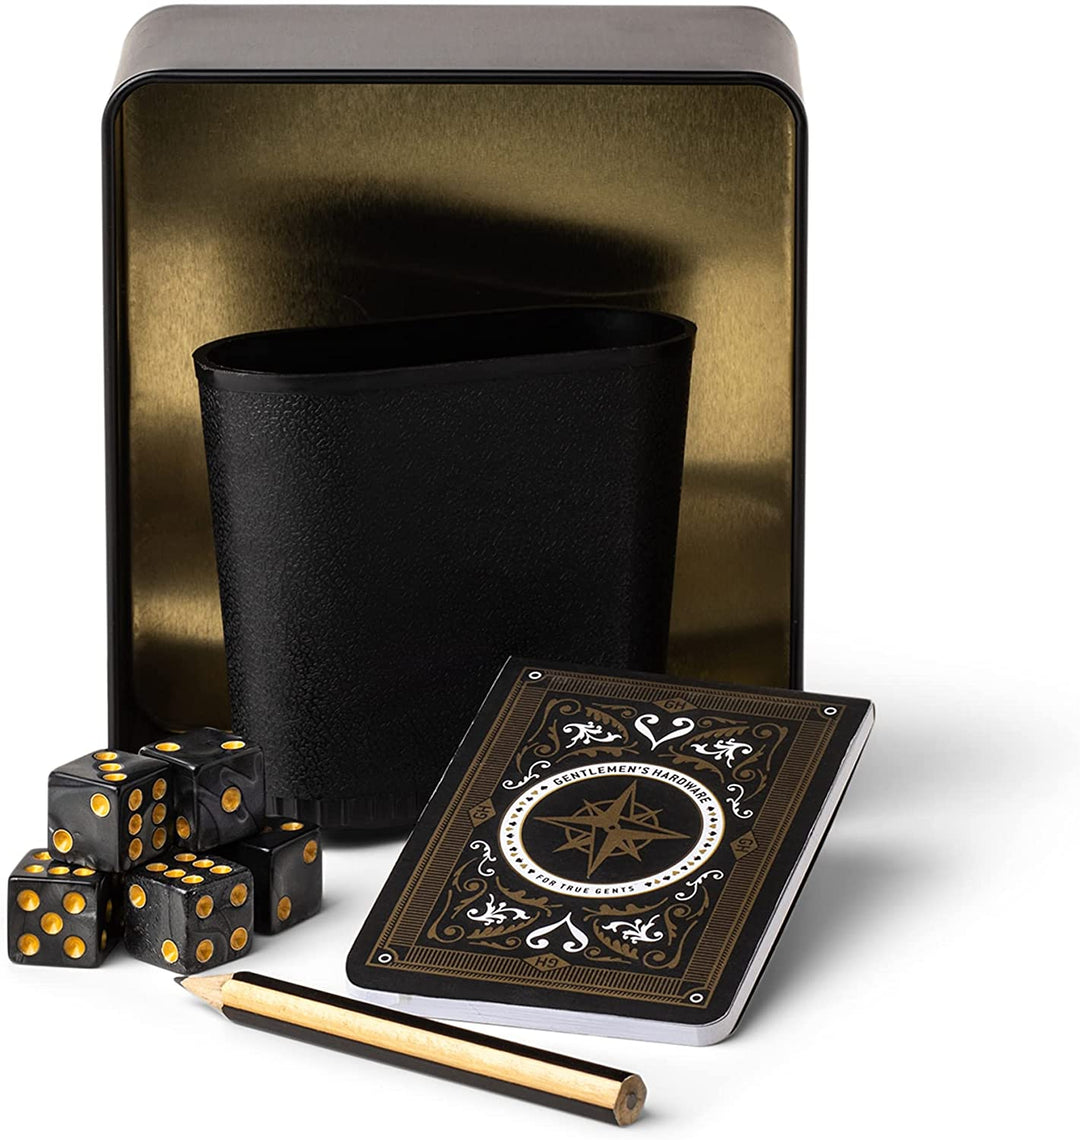 PUSH YOUR LUCK DICE GAME - Kingfisher Road - Online Boutique